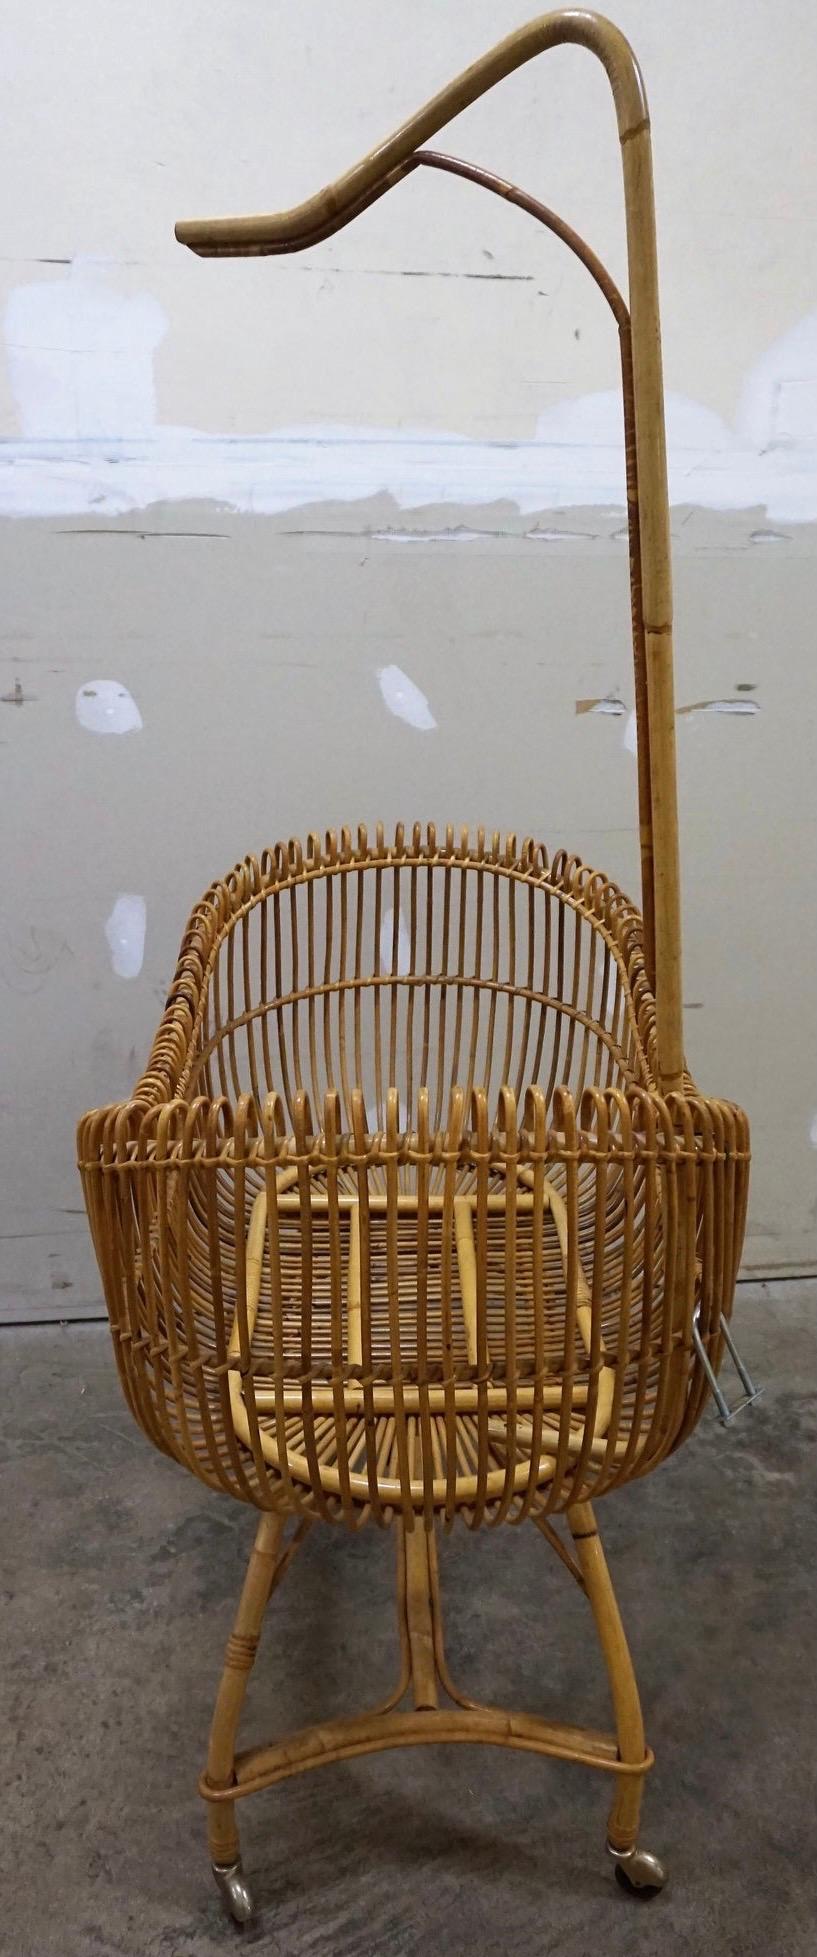 Mint condition bamboo cradle, circa 1950s.
All original and in great shape.